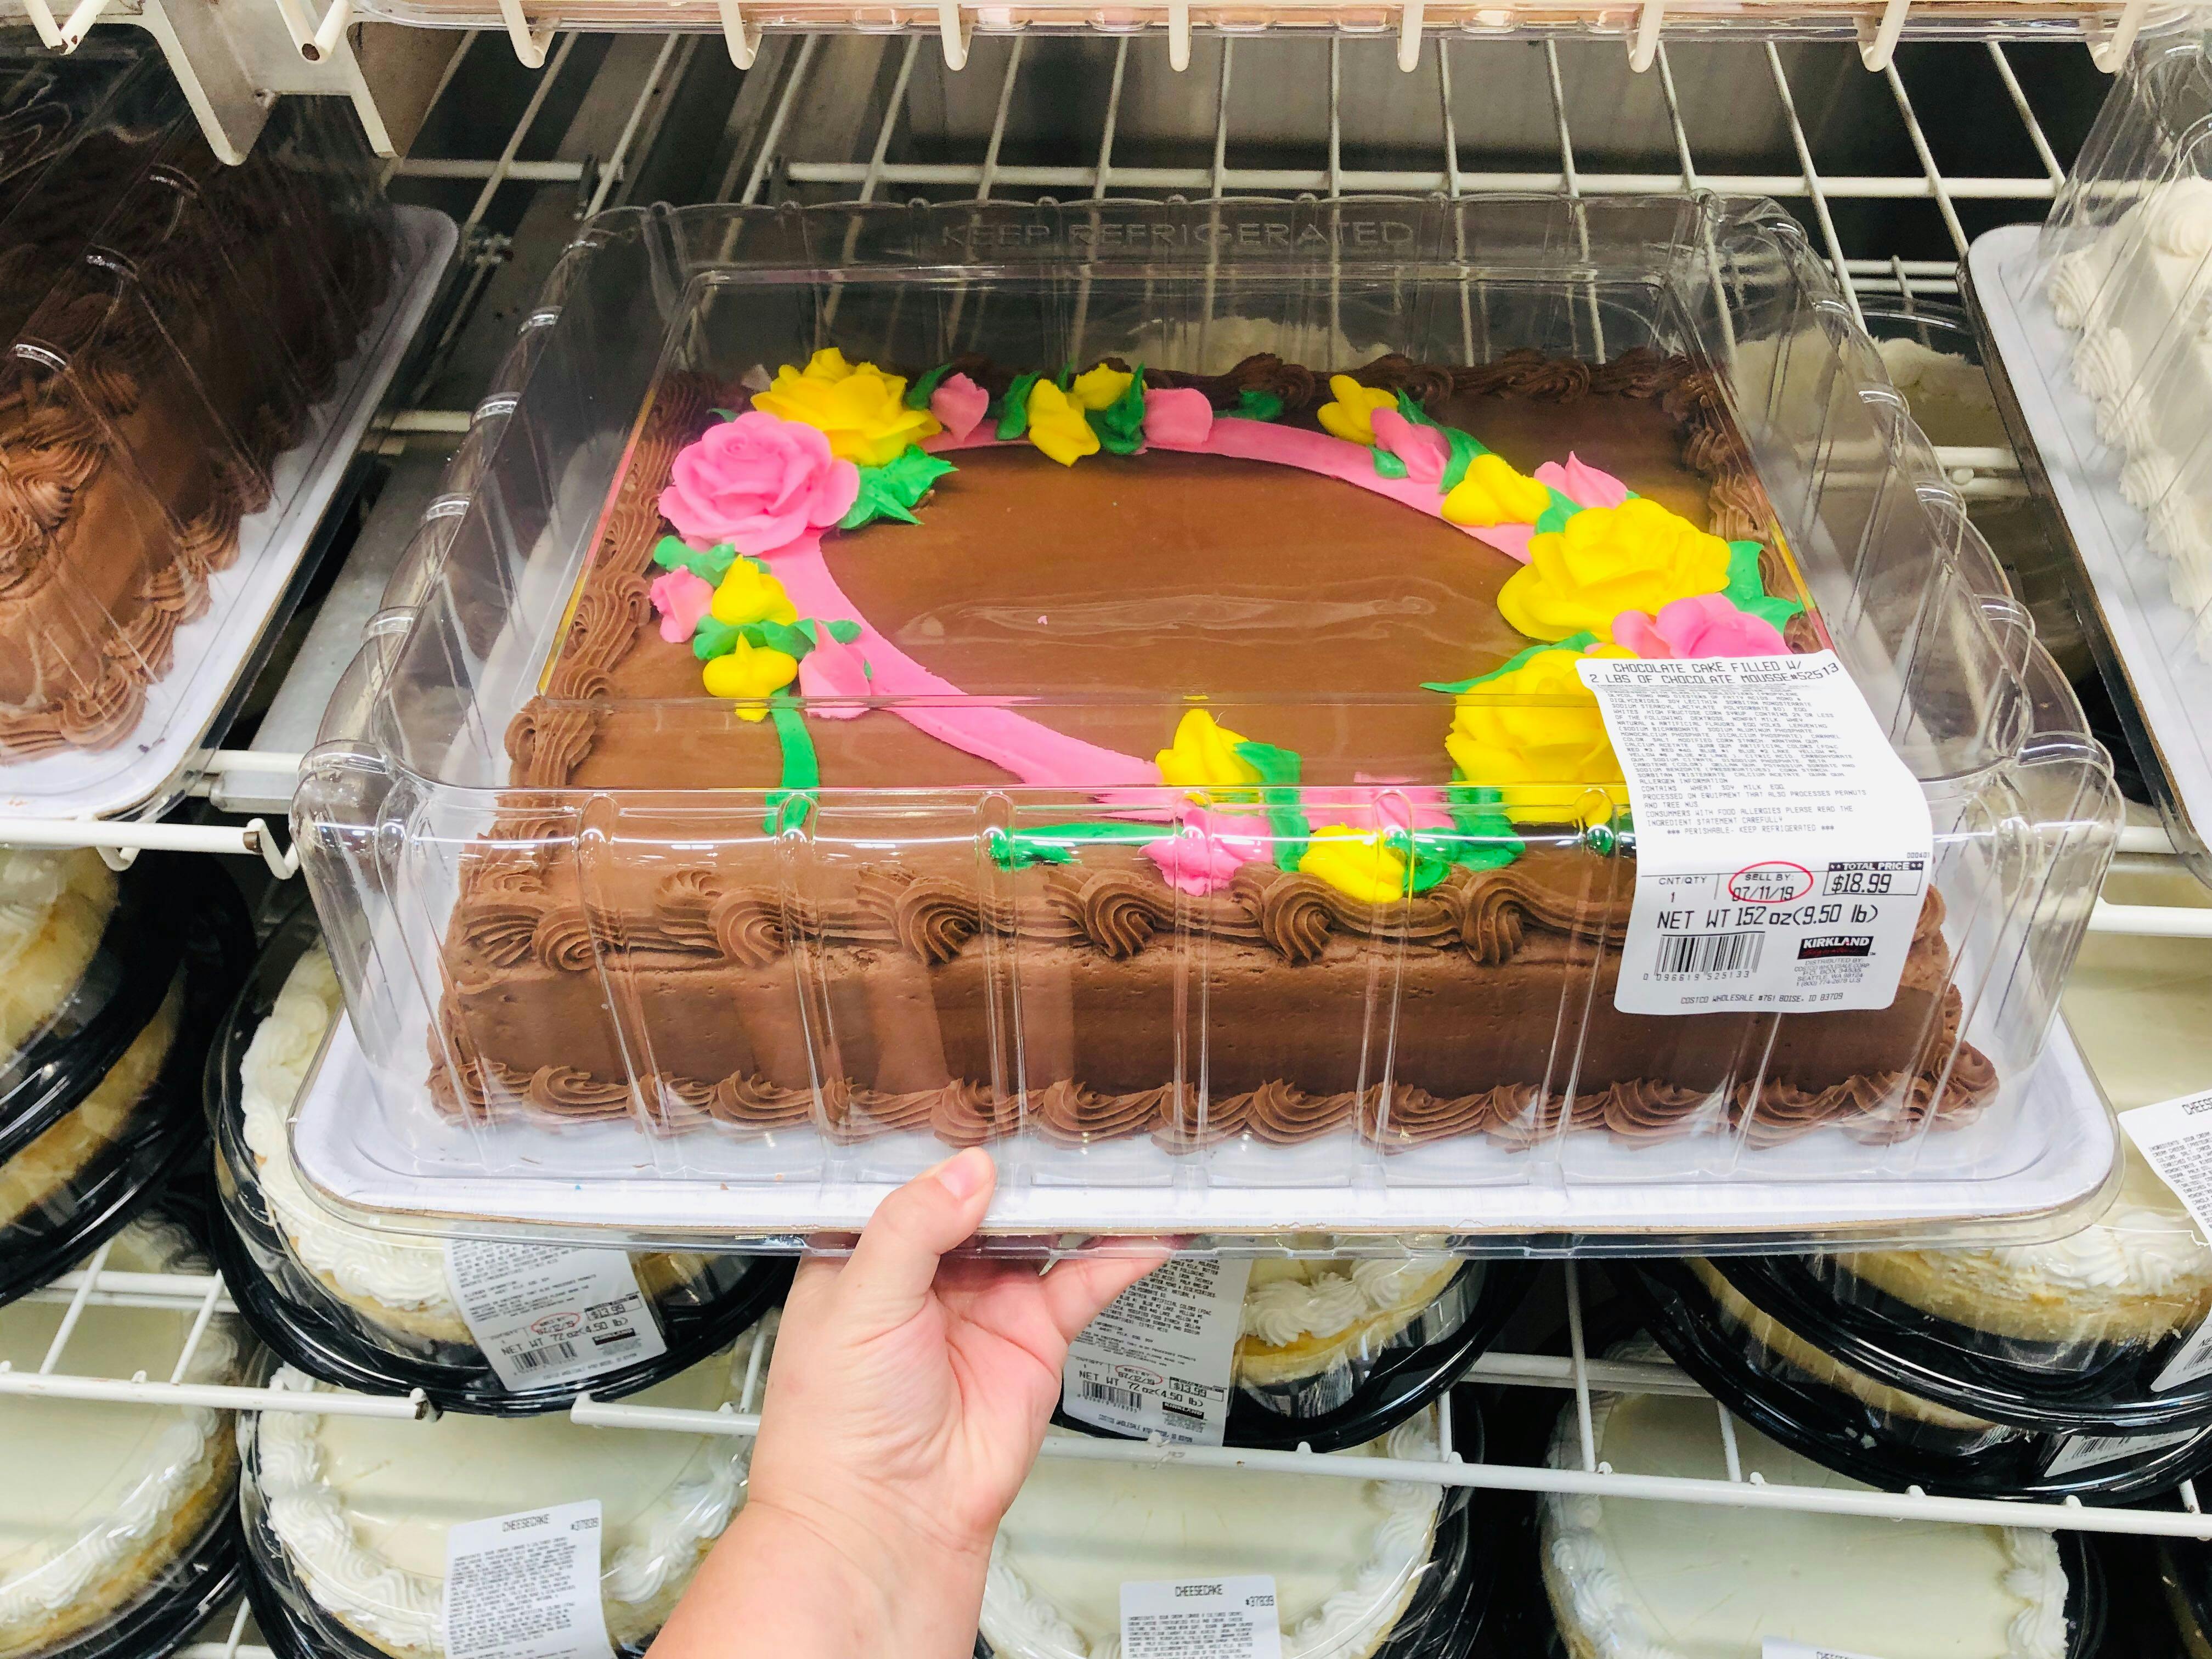 Everyone is posting Costco cakes with custom decoration. Printed custom  design on edible sheet. : r/Costco